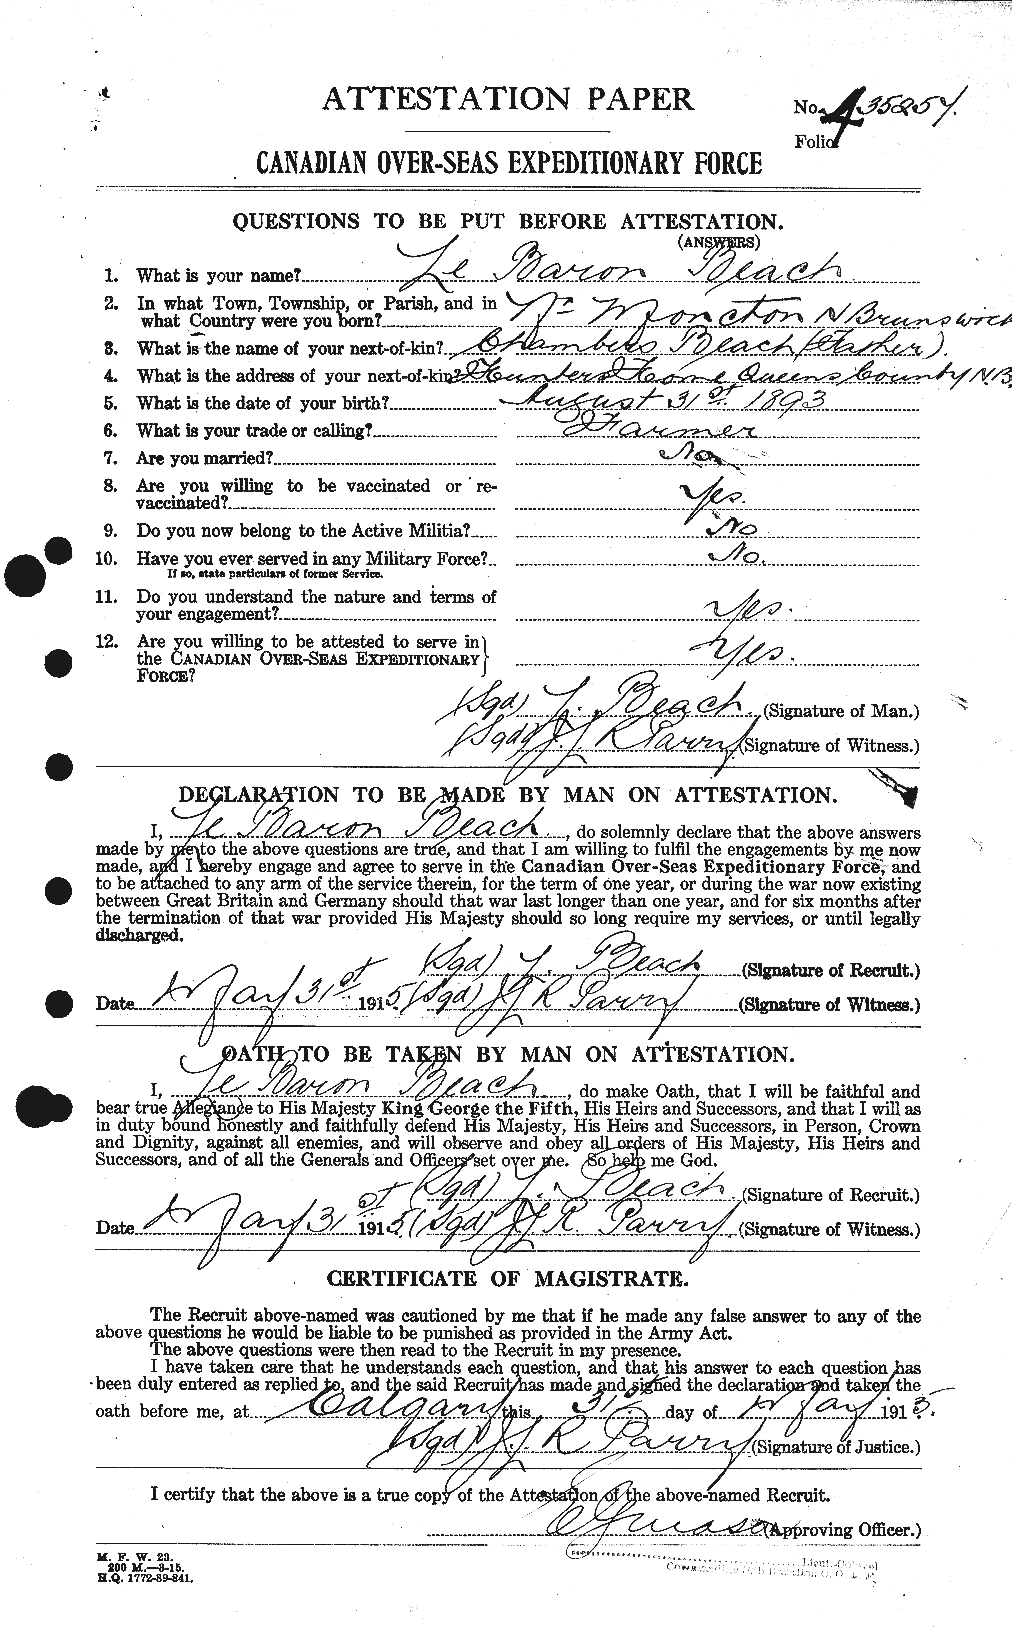 Personnel Records of the First World War - CEF 235124a